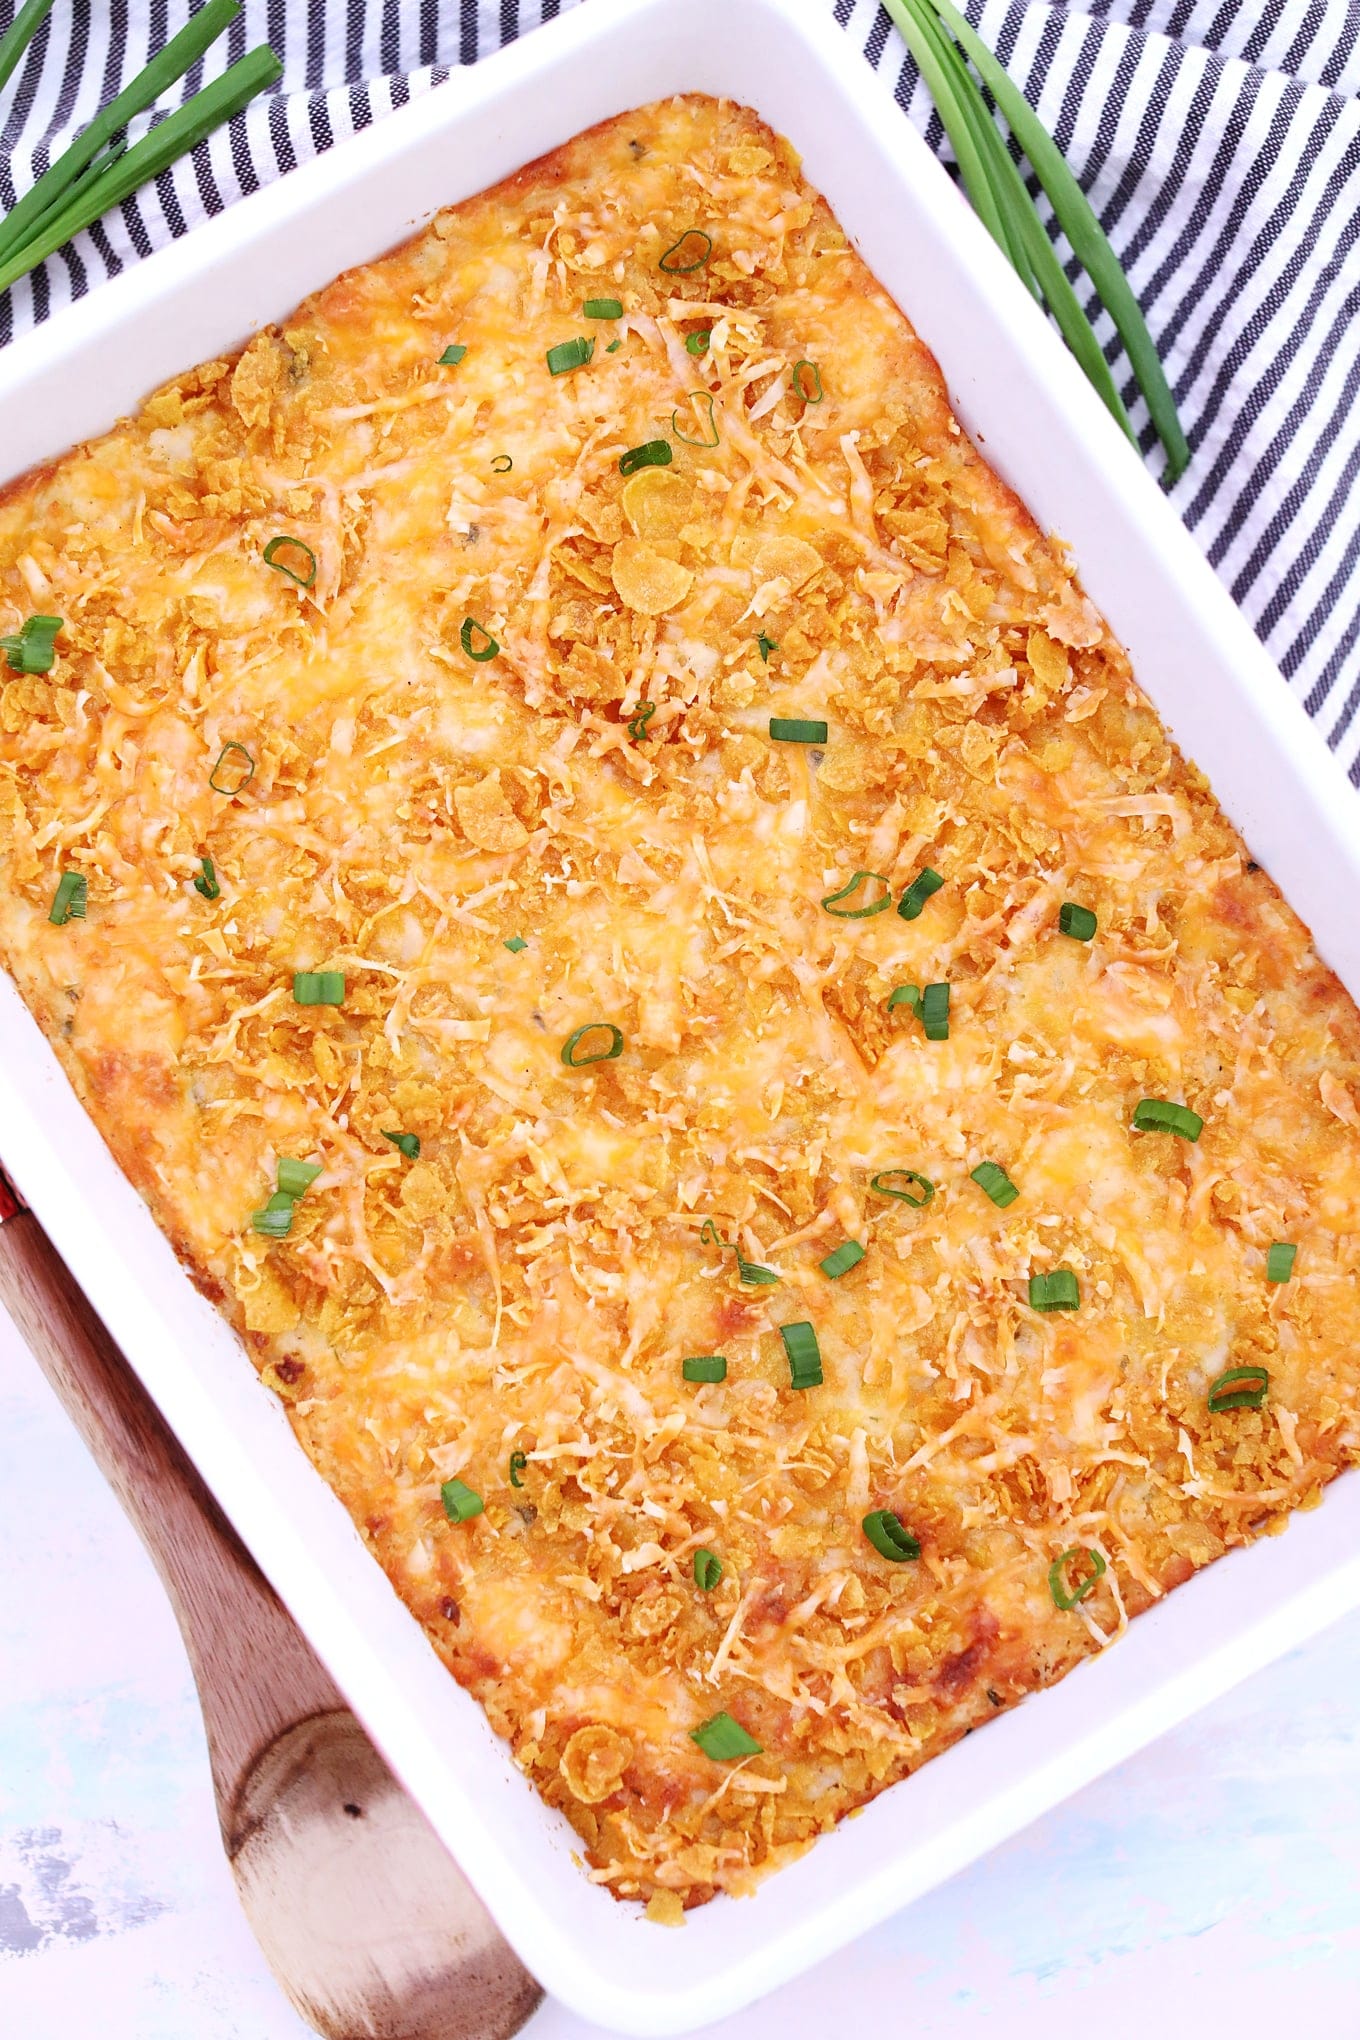 The Best Cheesy Potatoes Recipe [video] - Sweet and Savory Meals